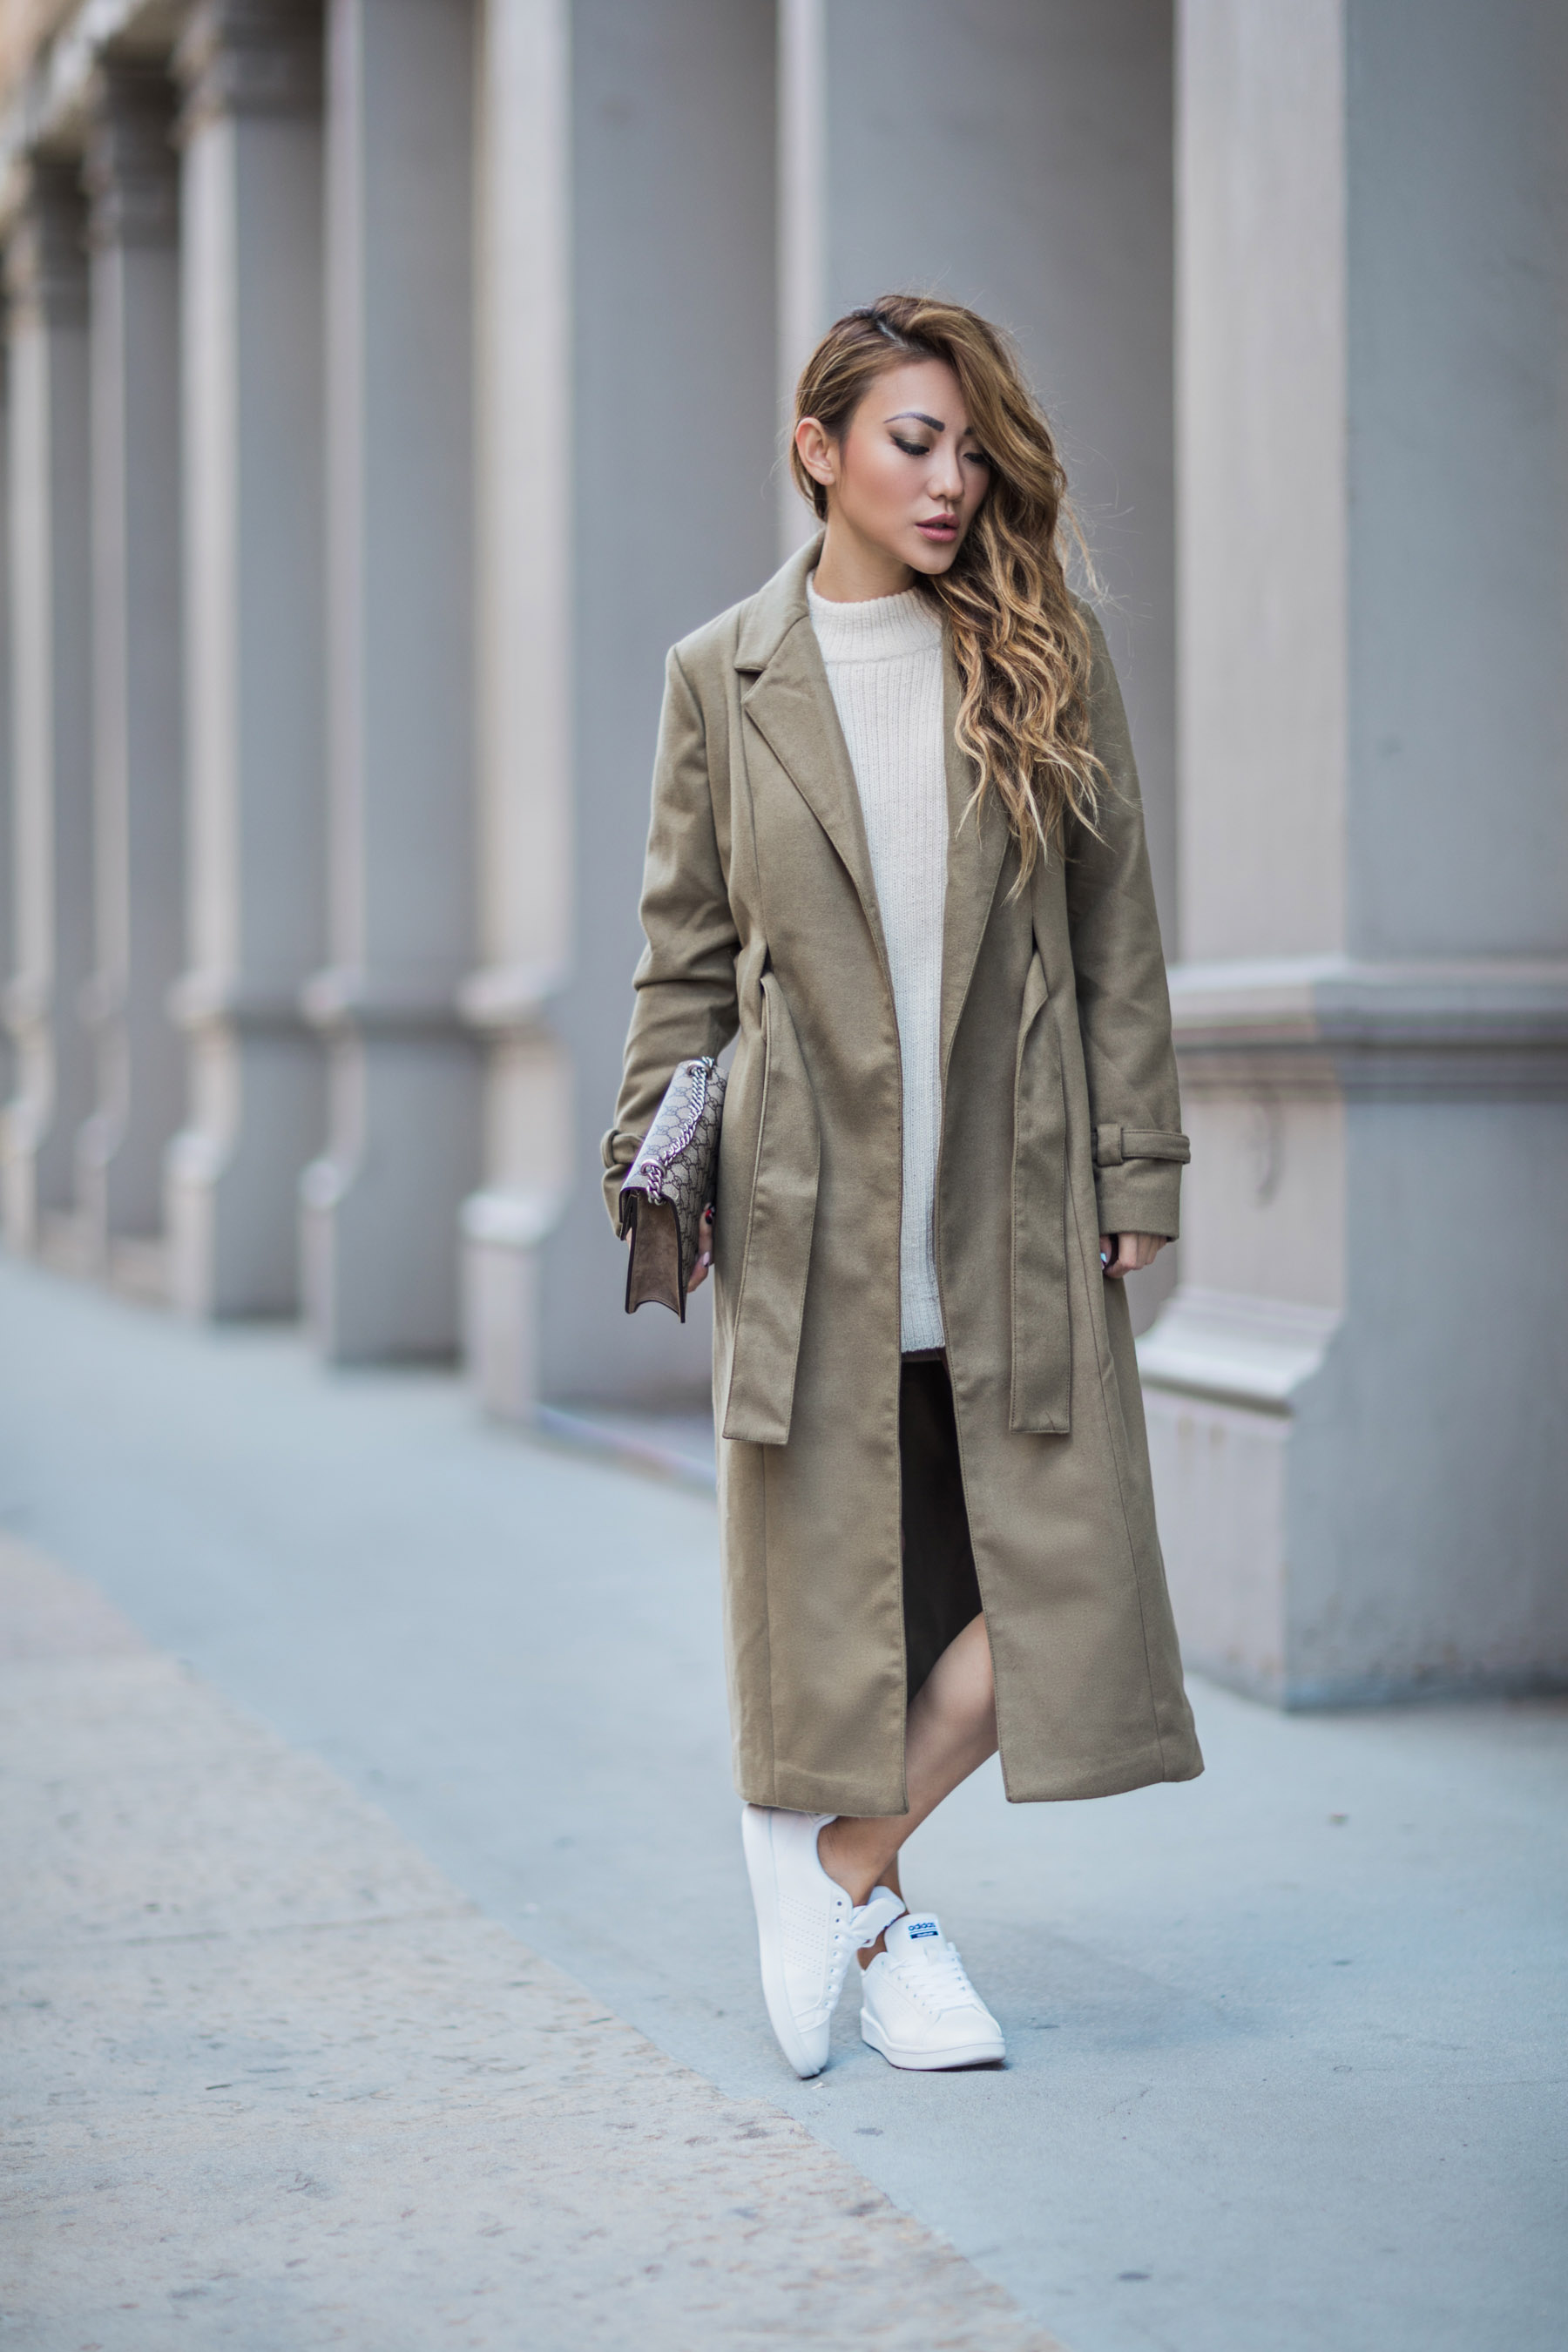 3 NEW TRENCH COAT STYLES TO TRY THIS SEASON - NotJessFashion